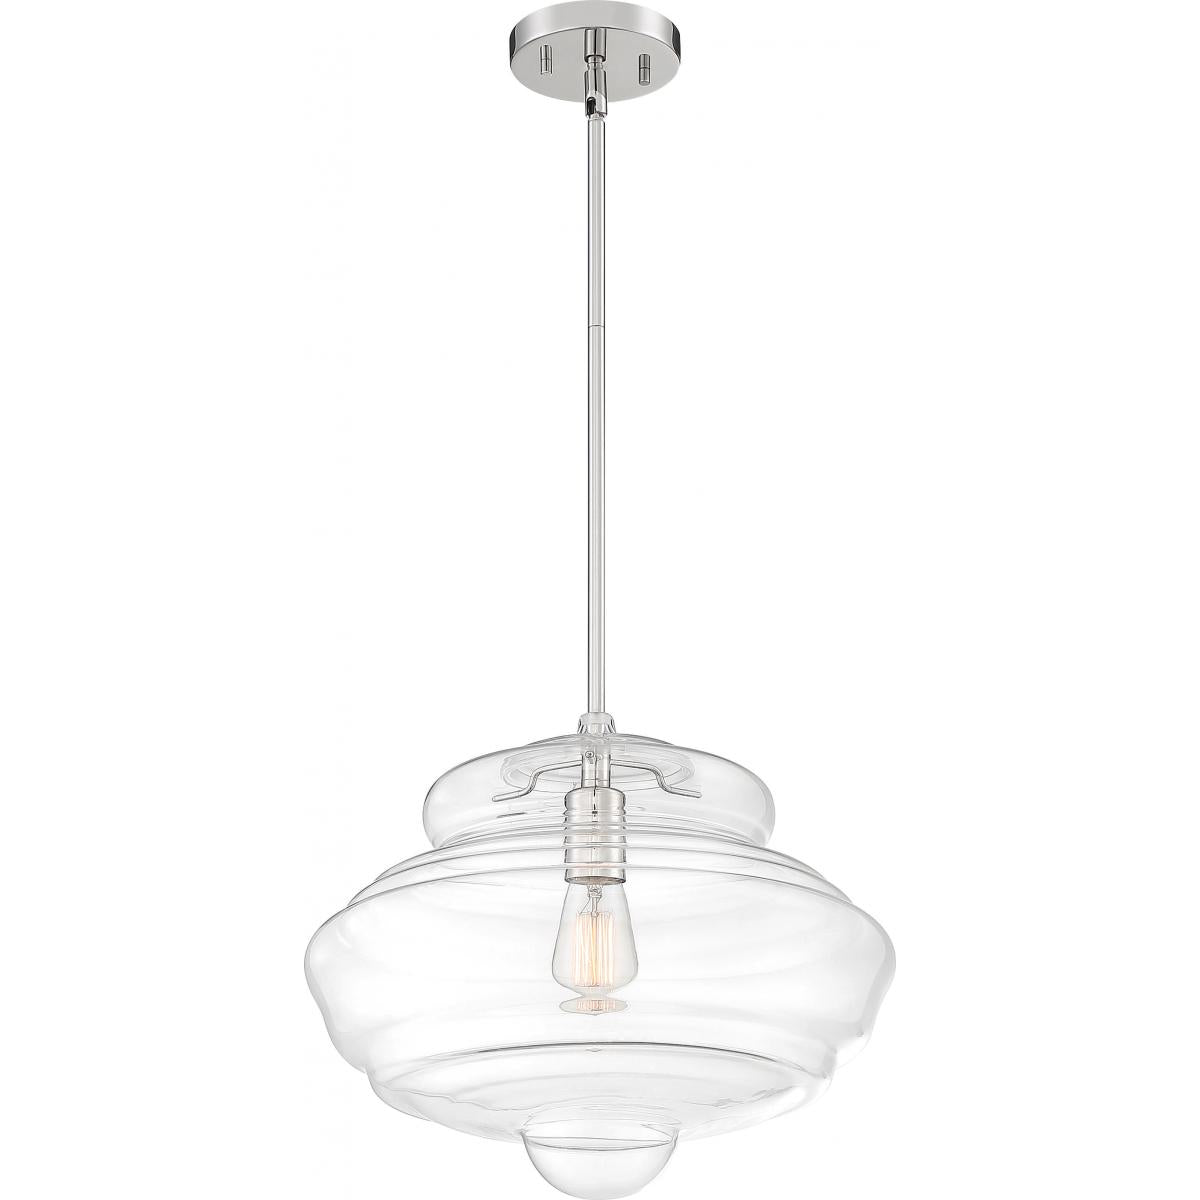 Storrier - 1 Light Pendant with Clear Glass - Polished Nickel Finish